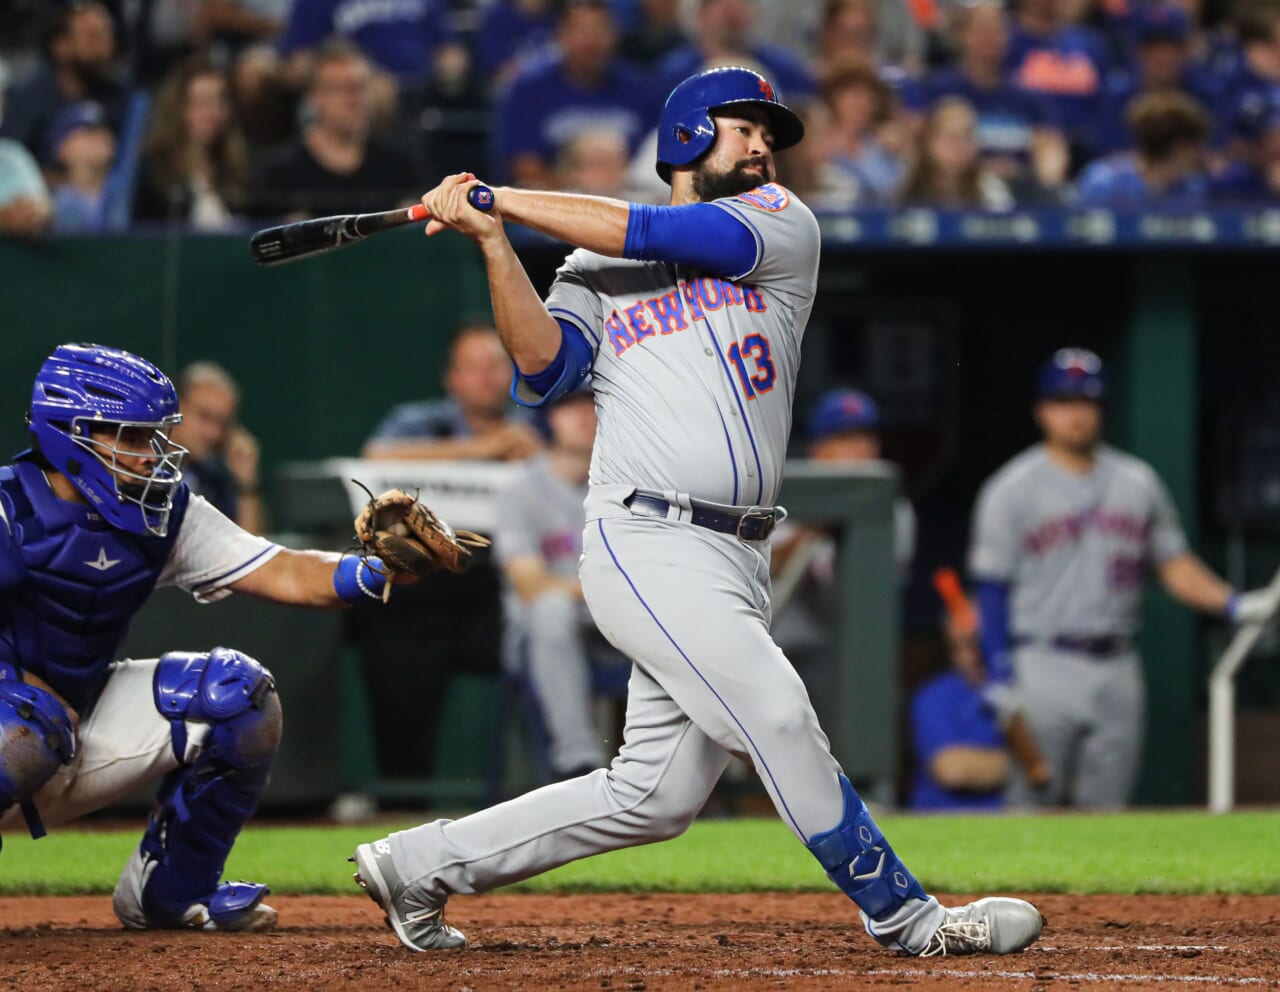 The New York Mets need to make roster decisions when baseball returns